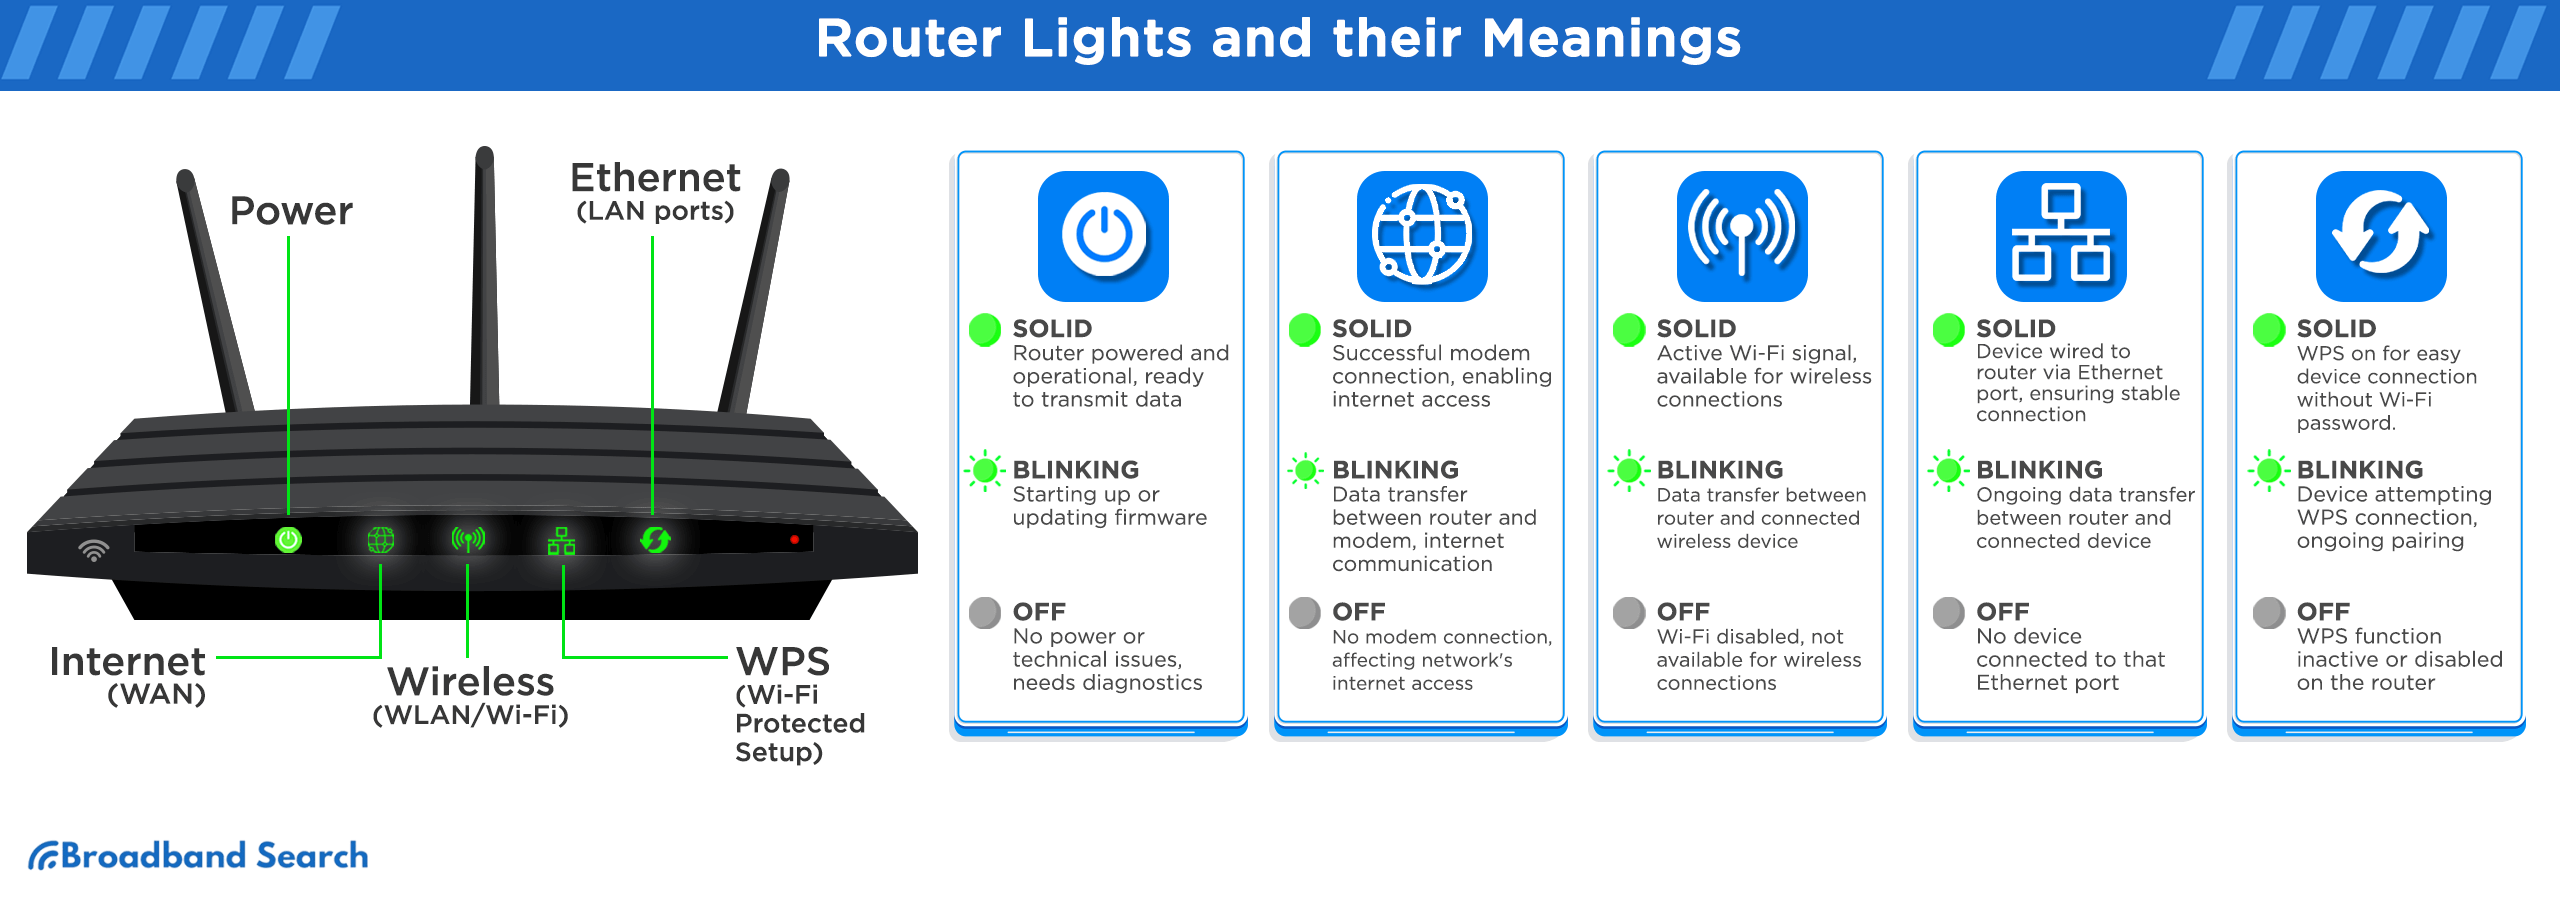 Router lights and their meanings